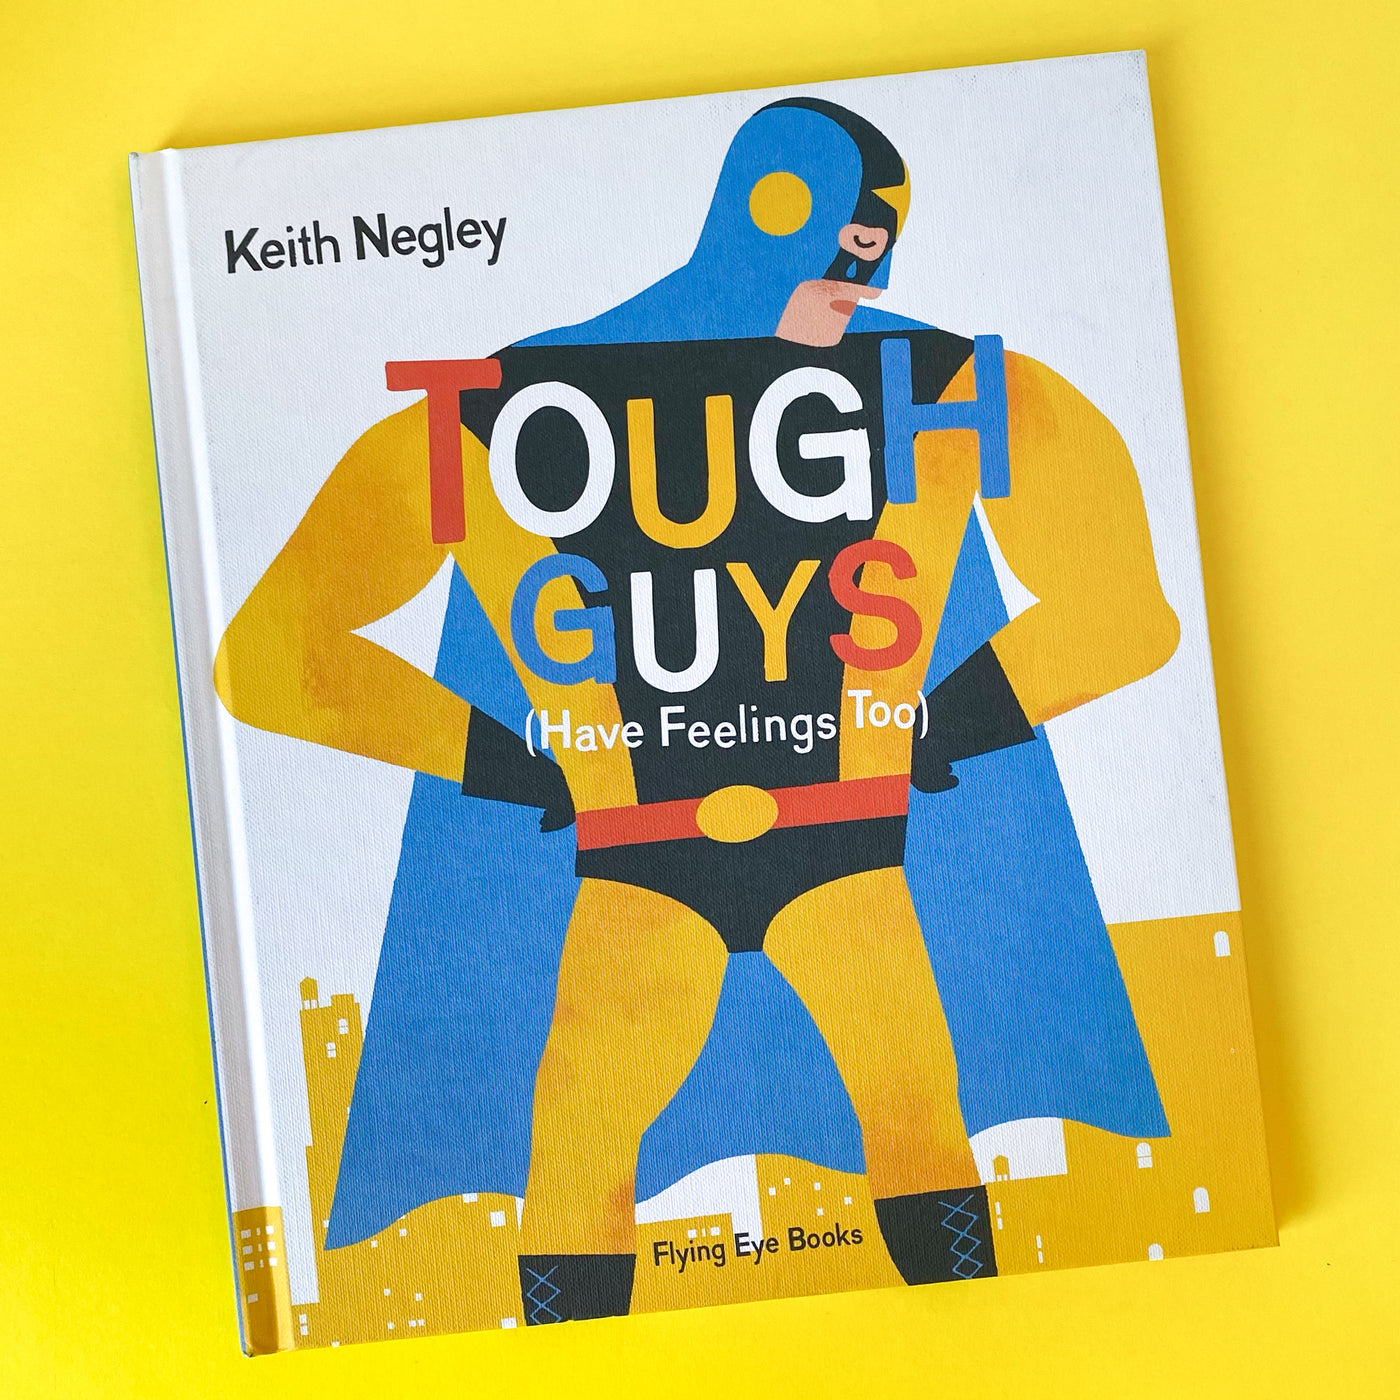 Tough Guys Have Feelings Too by Keith Negley